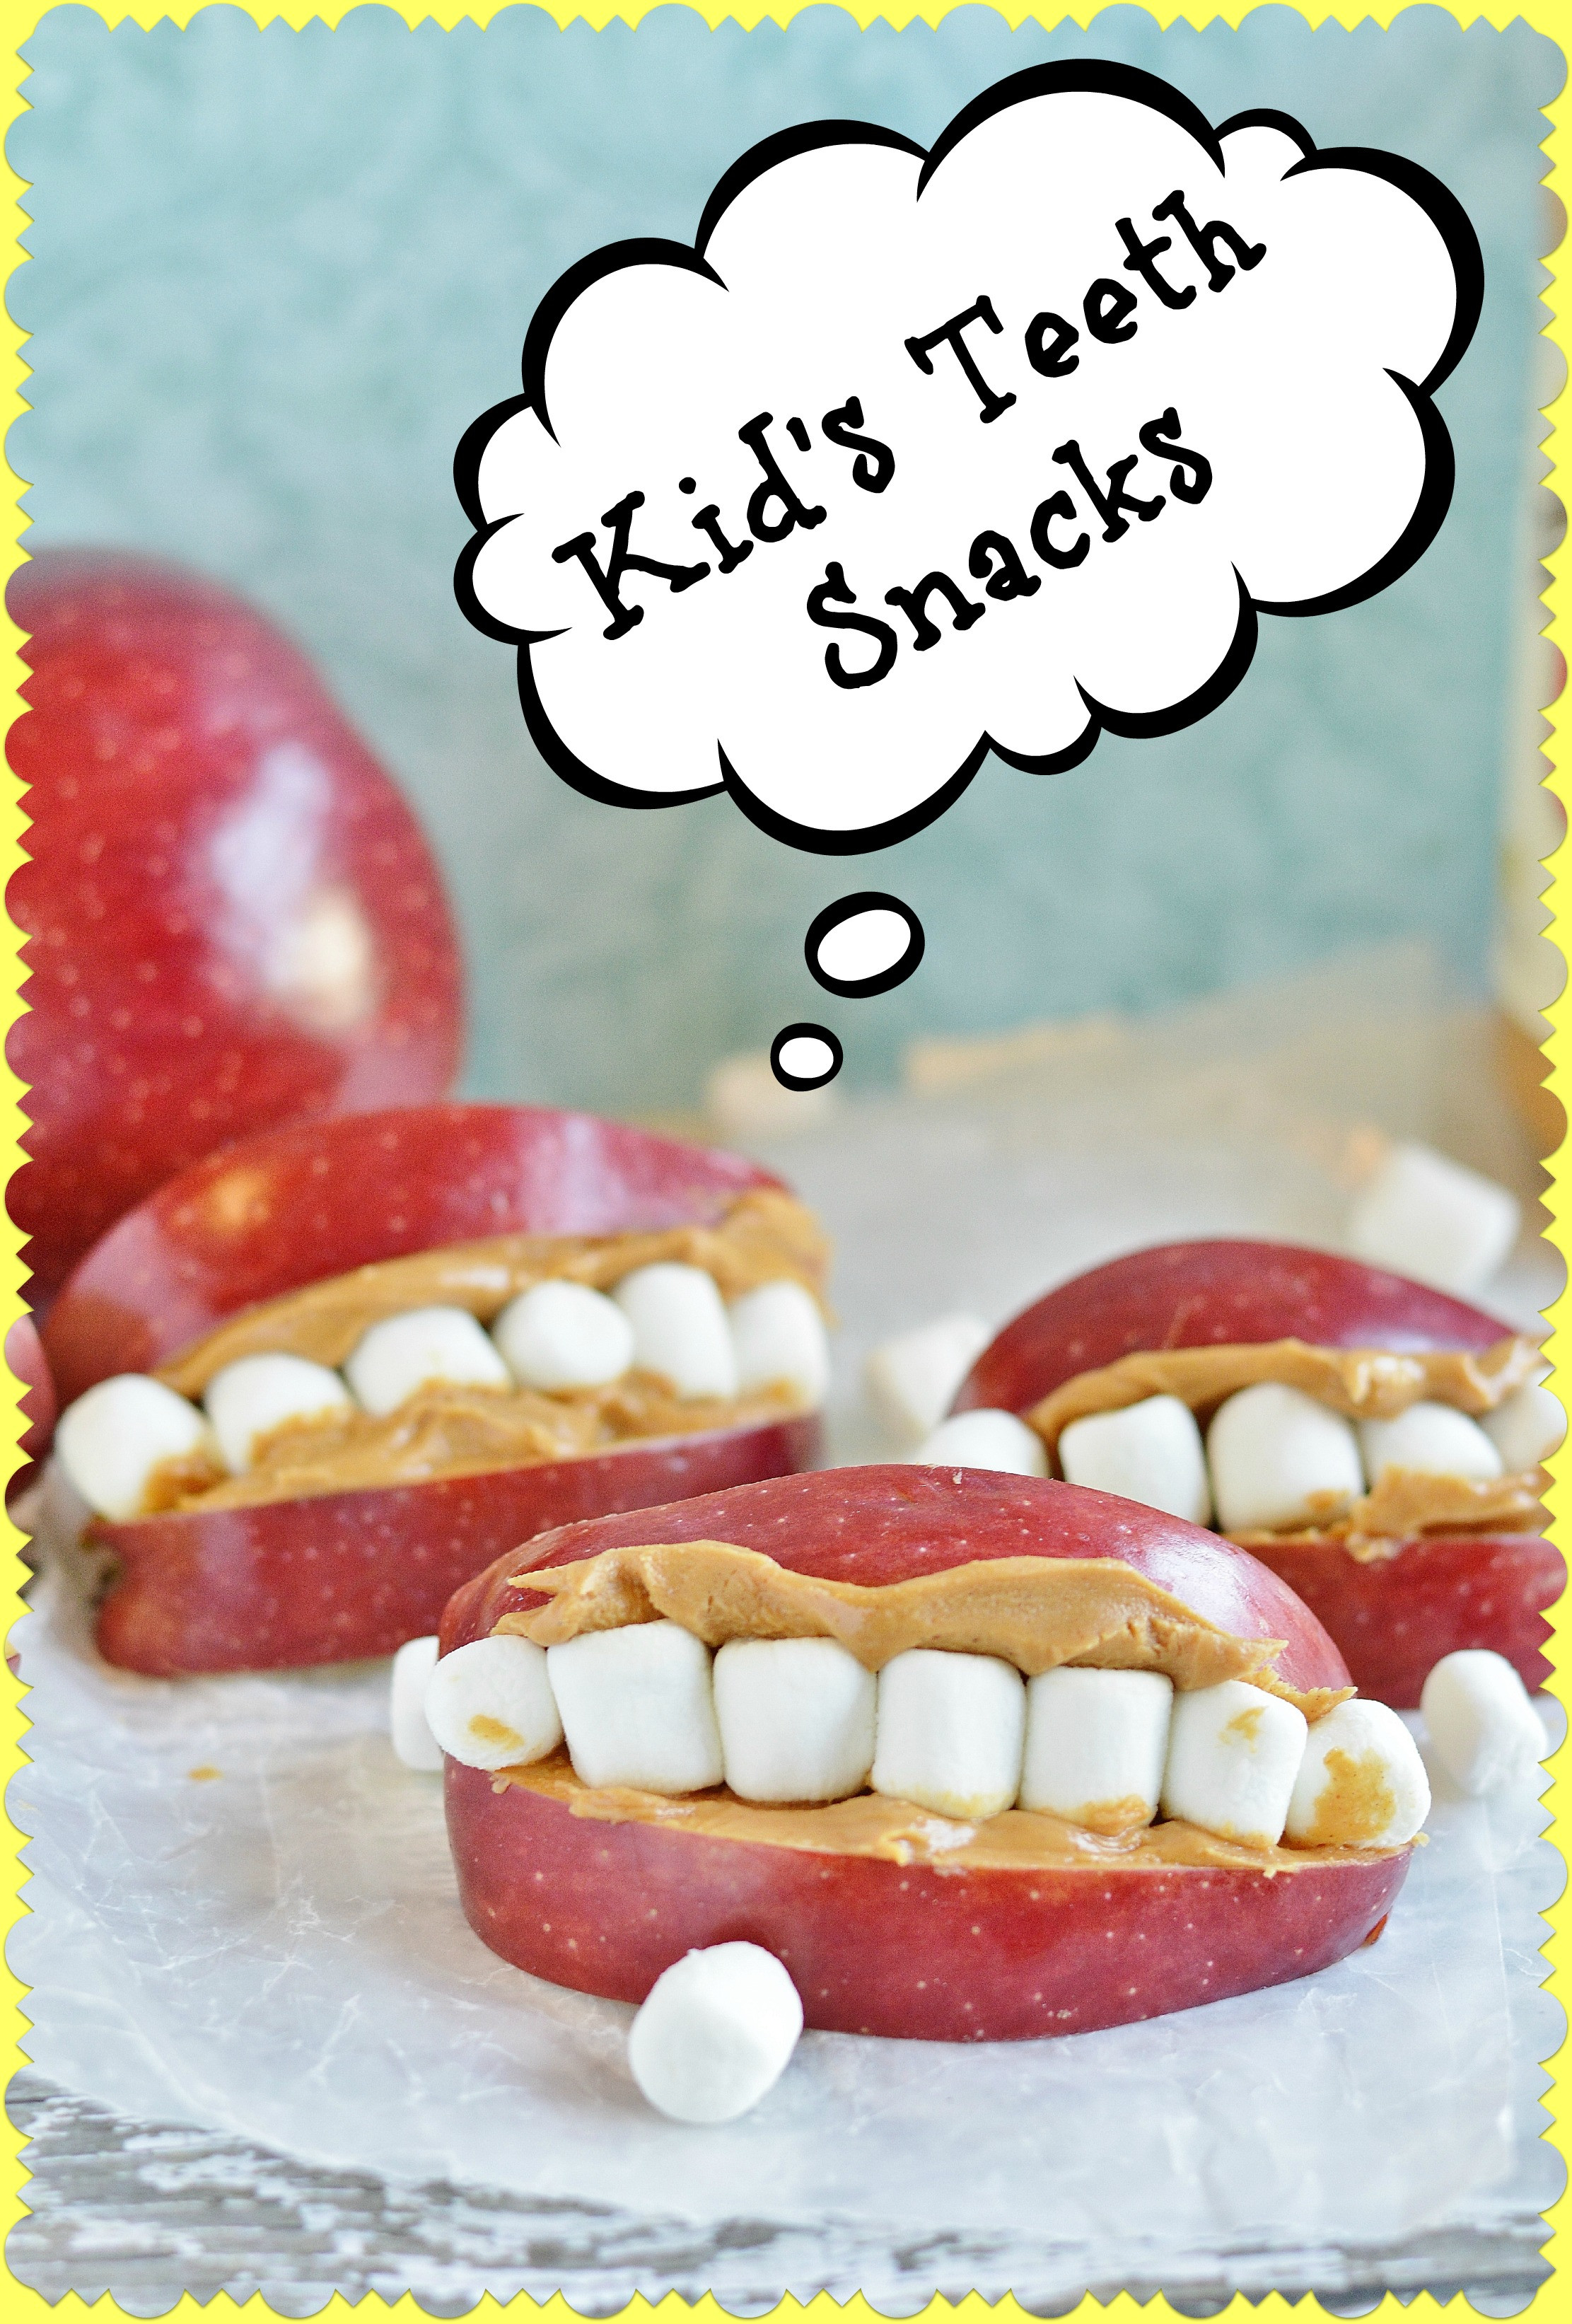 Healthy Snacks For Teeth
 Kid s FUN Teeth & Mouth Snack Great for Halloween too